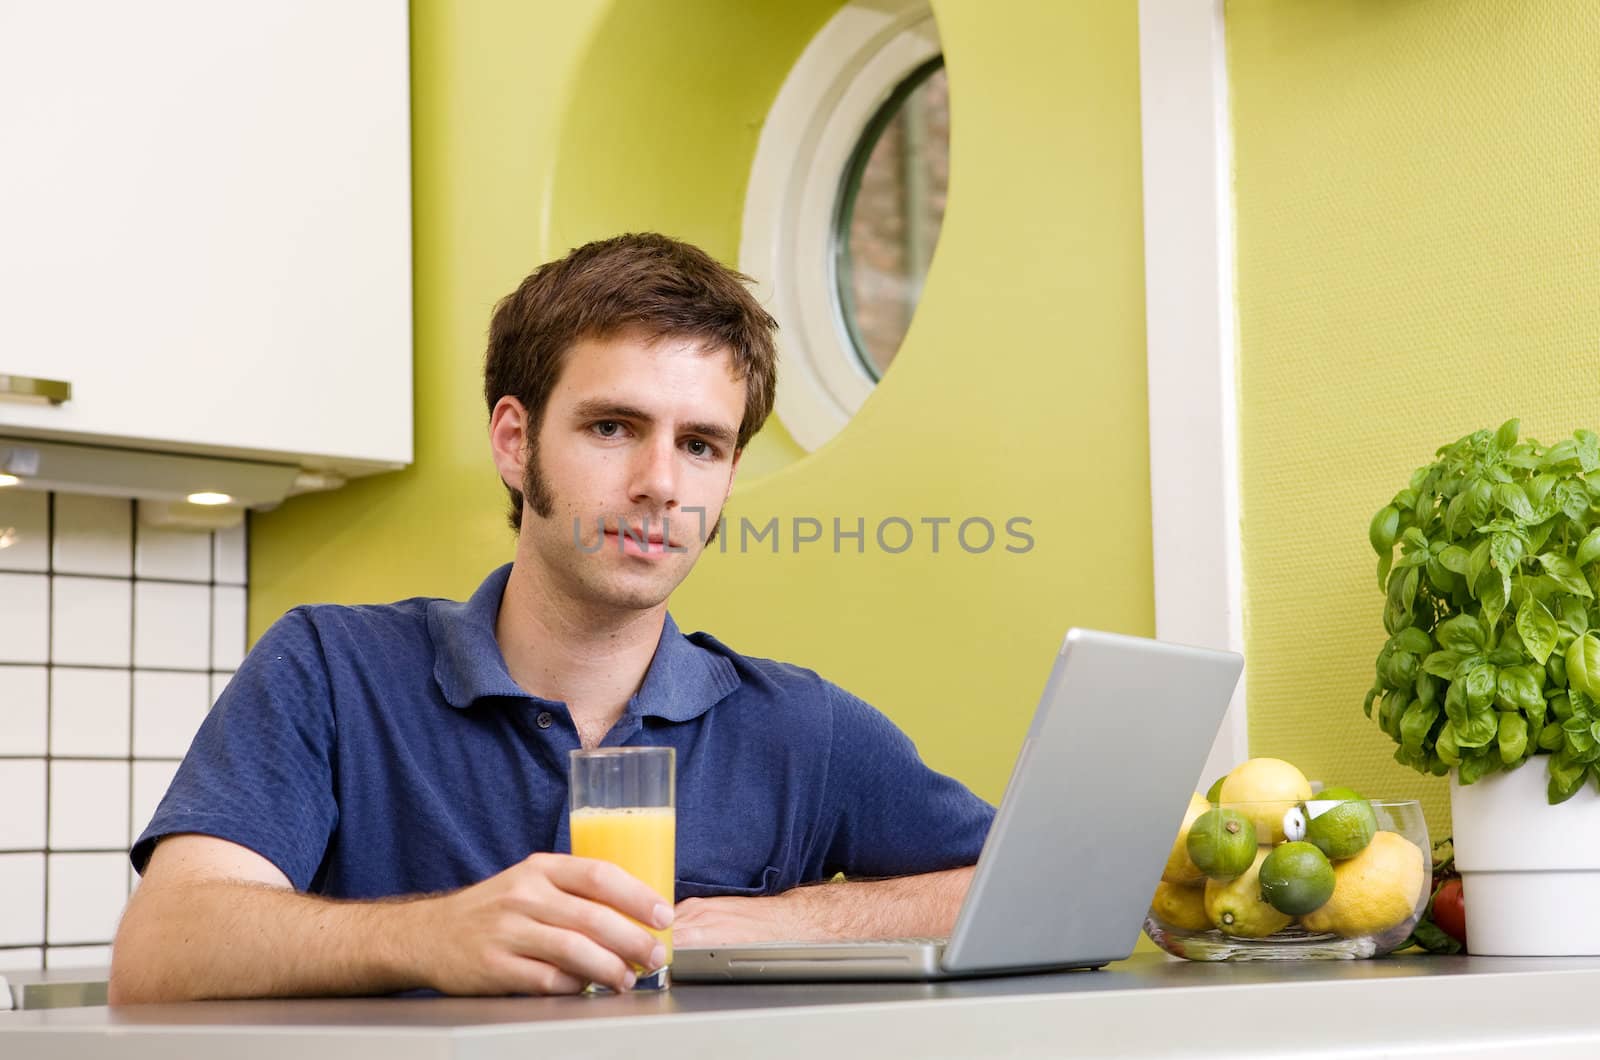 A young male using a laptop computer in the kicthen and smiling at the camera.